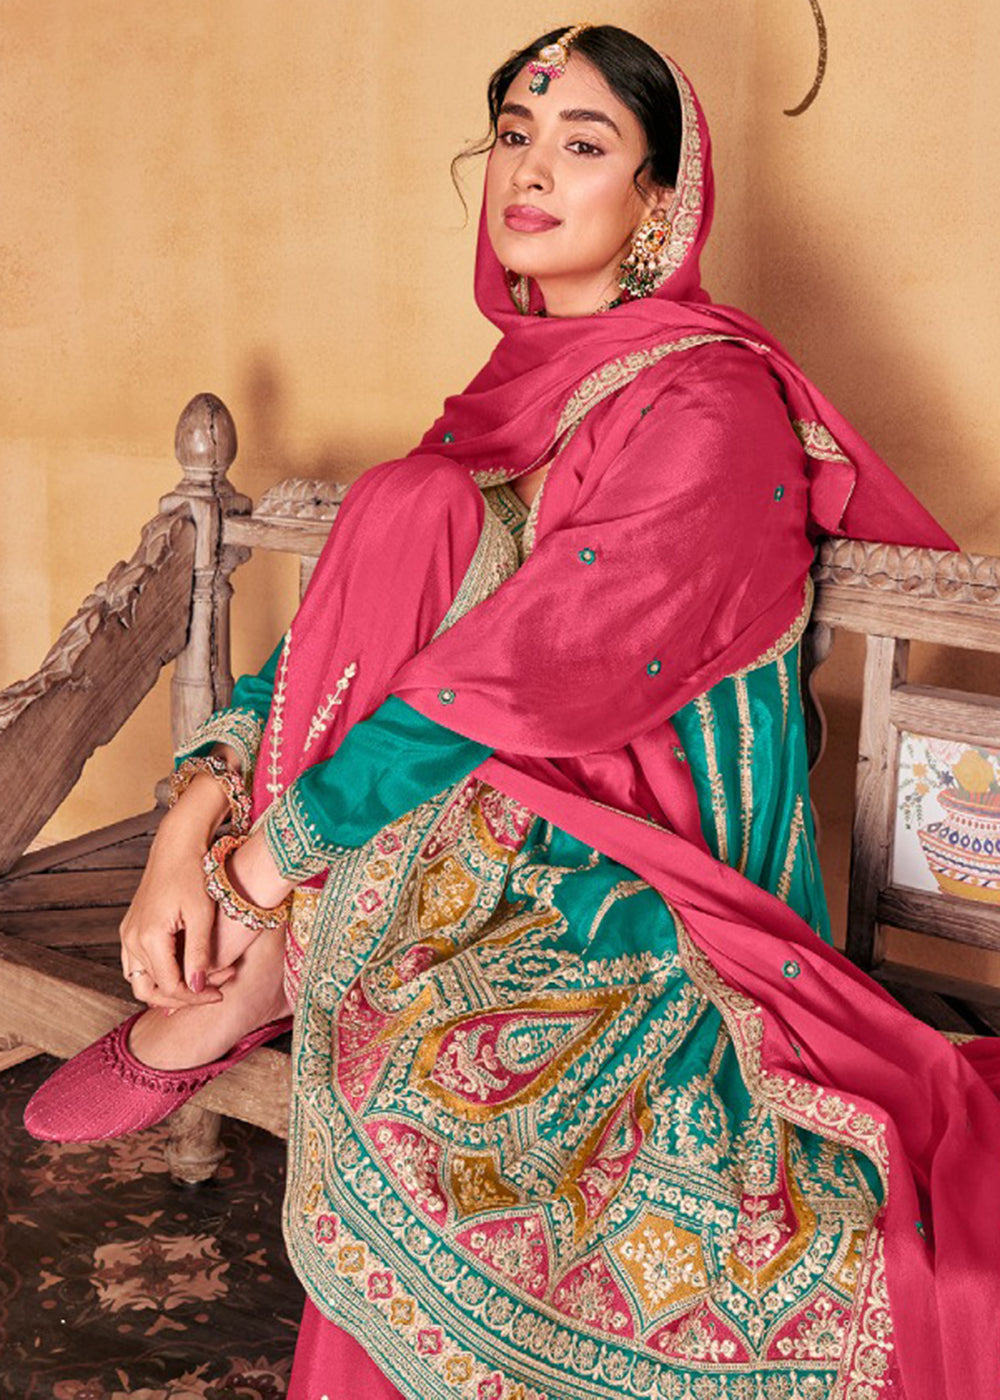 Buy Now Amazing Turquoise Heavy Chinnon Embroidered Palazzo Style Suit Online in USA, UK, Canada, Germany, Australia & Worldwide at Empress Clothing.